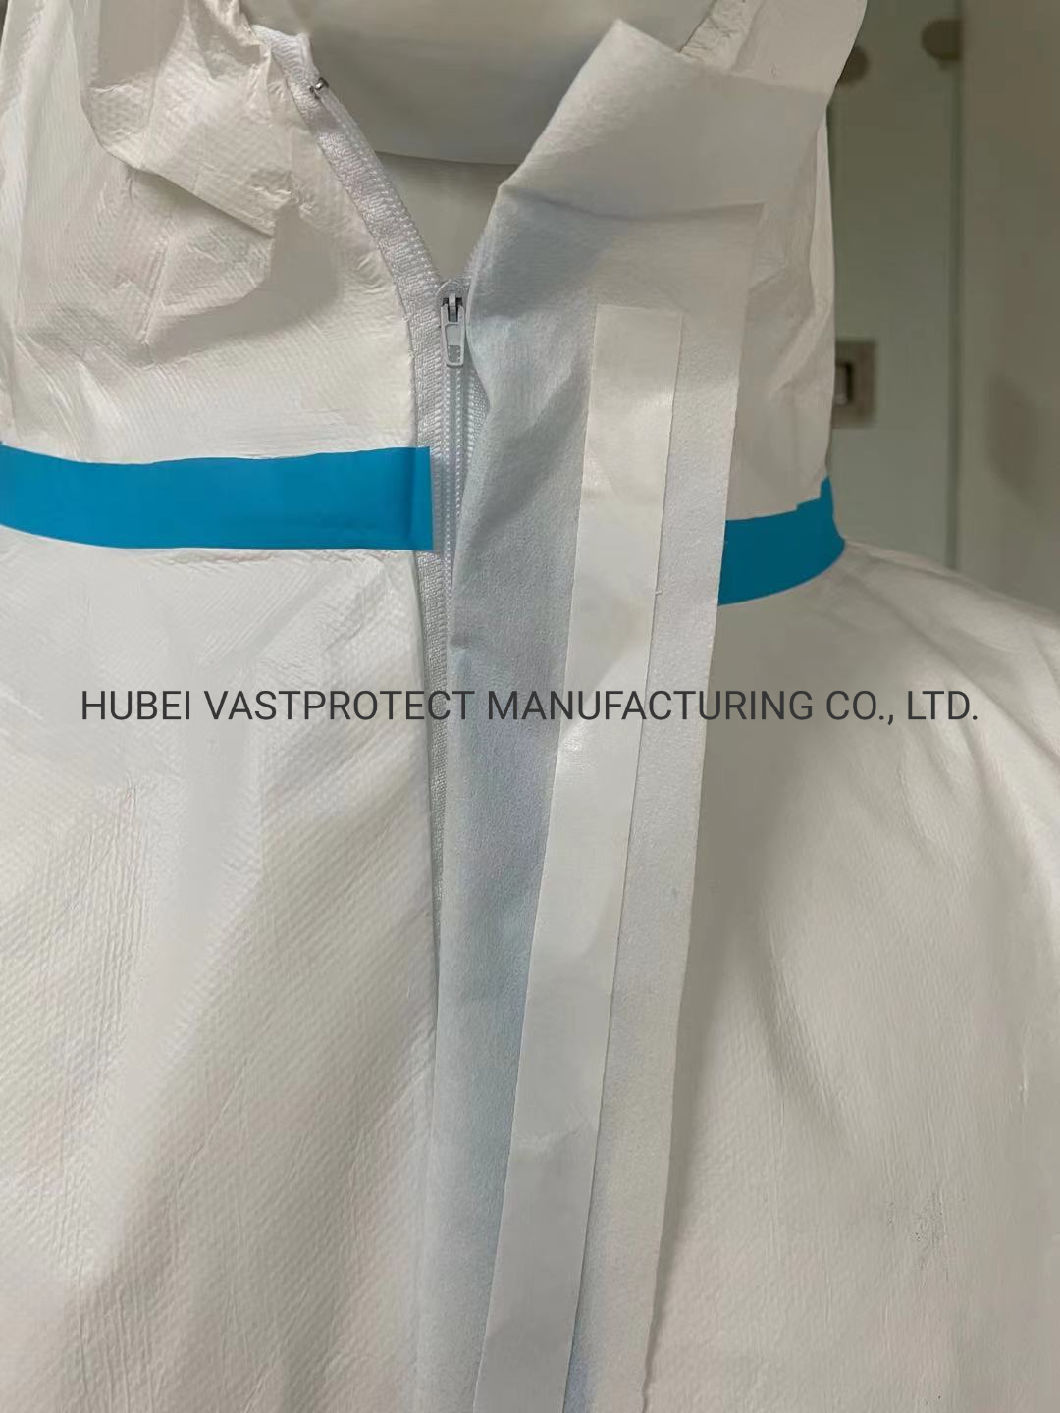 Manufacturer CE En14126 Cat 3 Type 4 5 6 Disposable White Coverall with Blue Tape